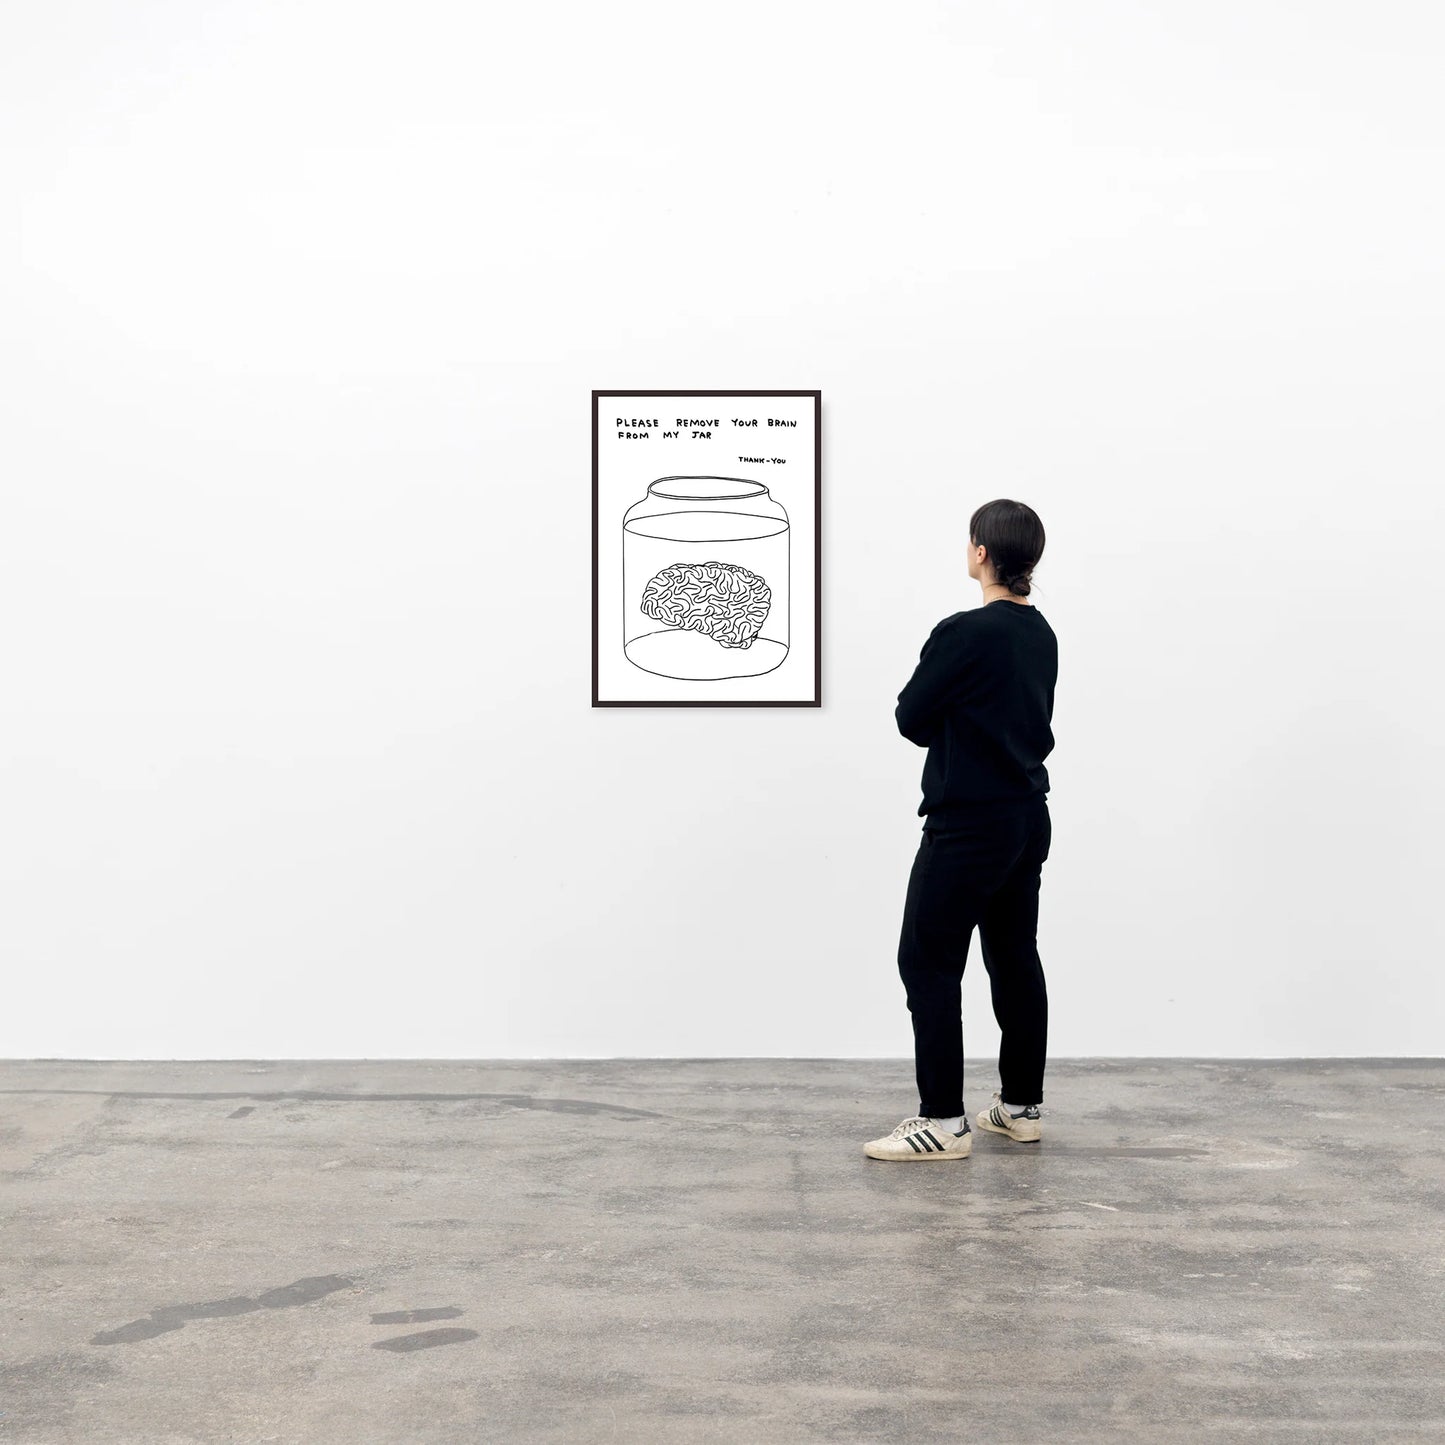 a photo of a david shrigley artwork titled 'please remove your brain from my jar' in a black frame, hung on a white wall and being looked upon by a single viewer on the right. the artwork features a white background, with a black line drawing of a brain in a jar of liquid, with text above stating 'please remove your brain from my jar tjank-you' in all caps. this is a david shrigley print for sale